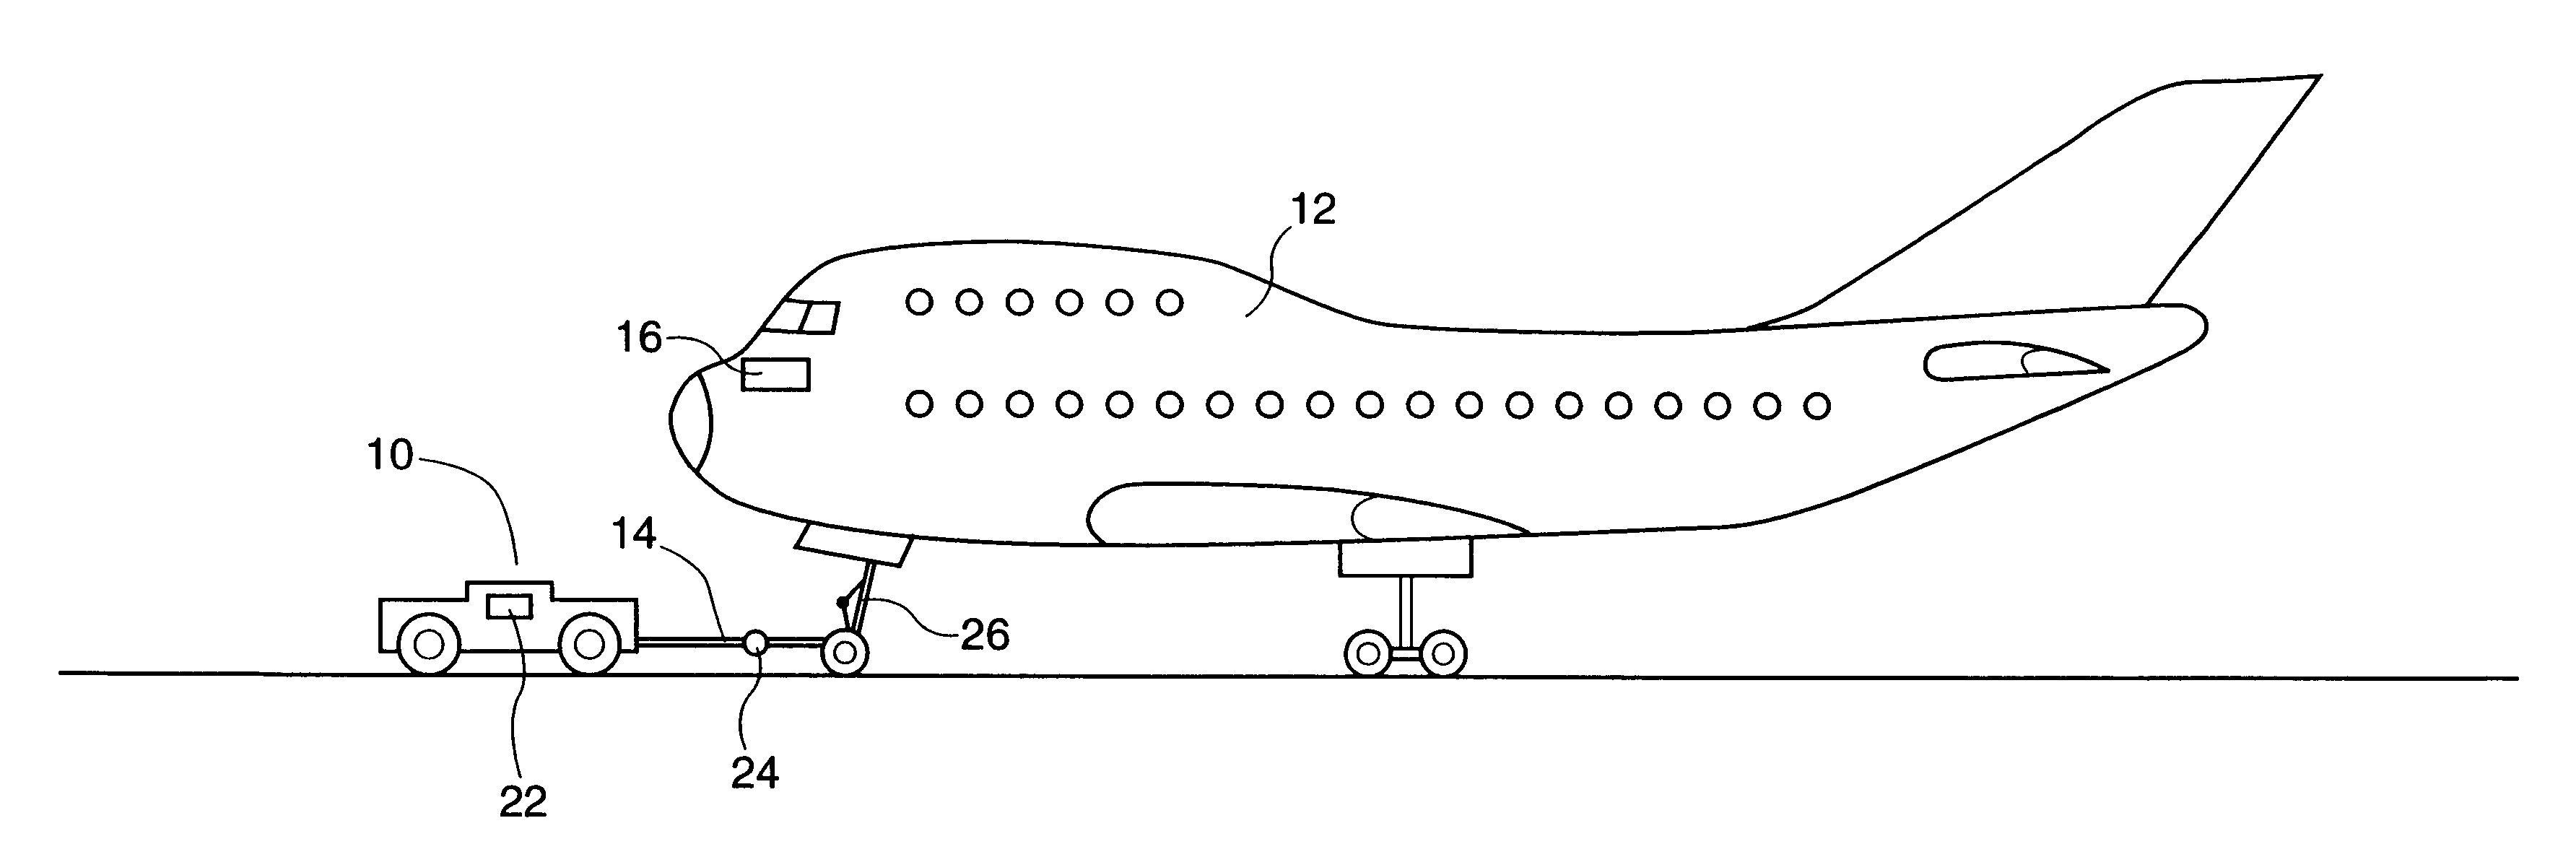 Automated aircraft towing vehicle system